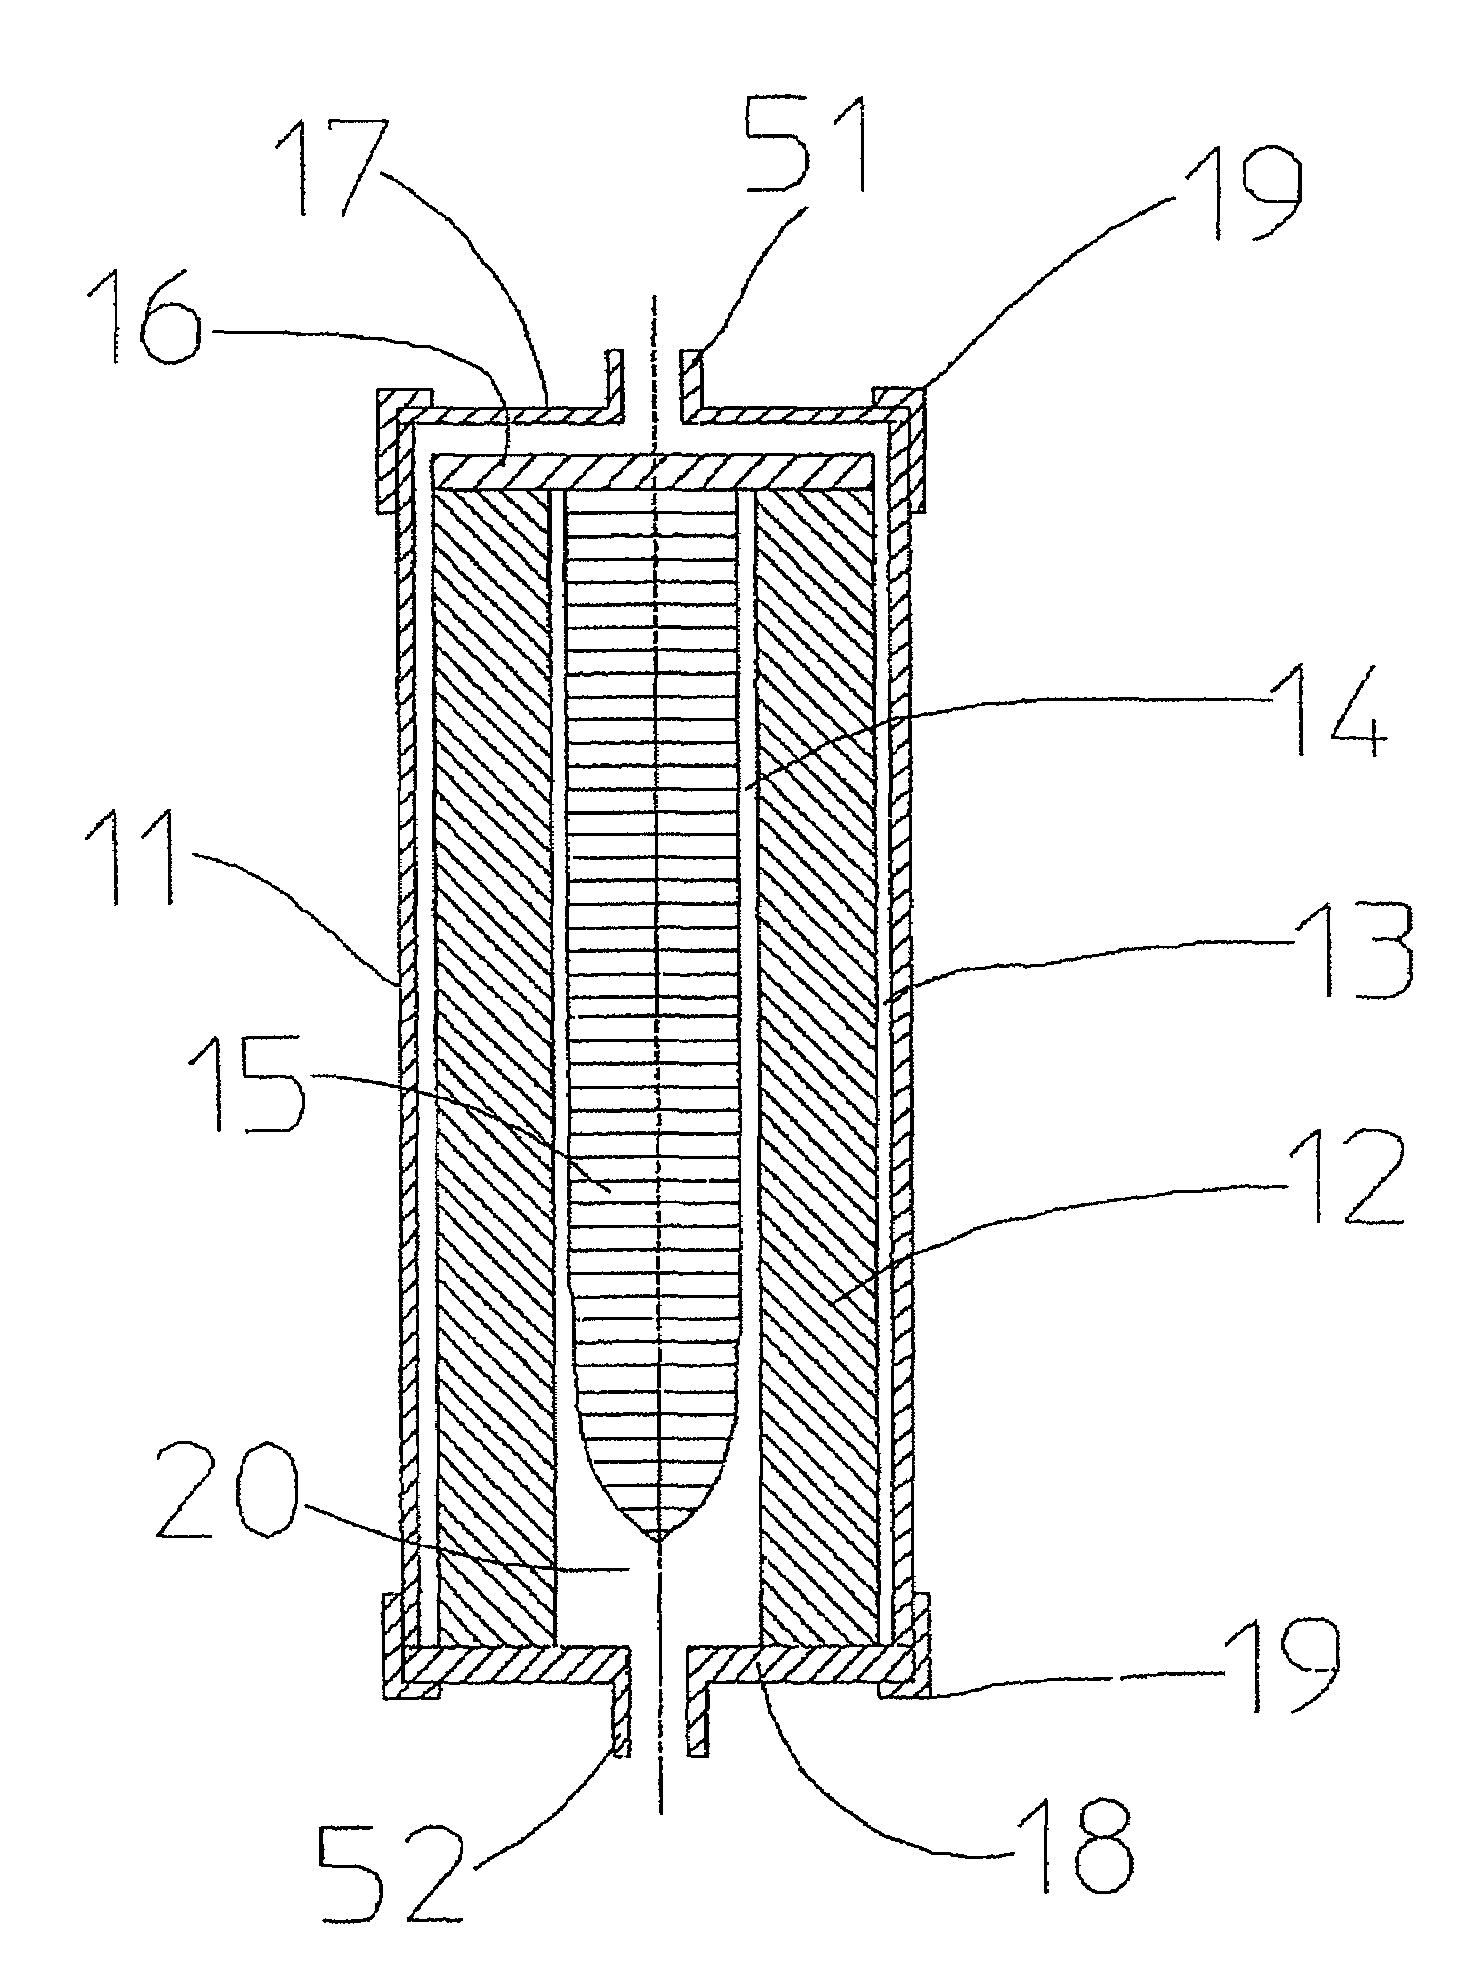 Body fluid treating filter device